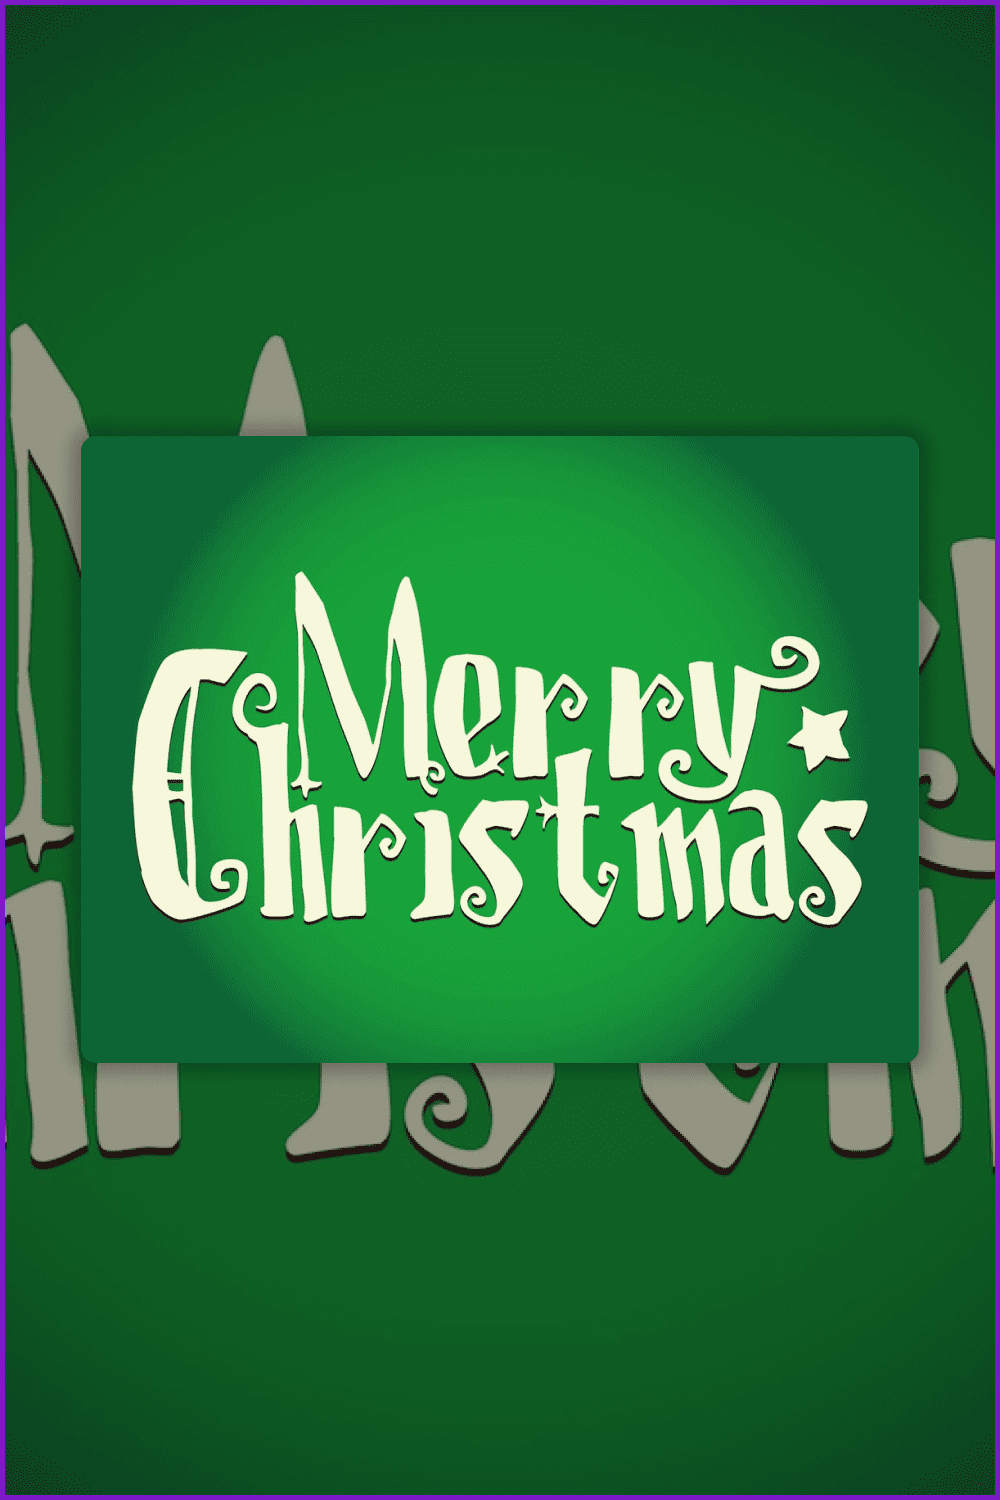 White text Merry Christmas in Grinch style on green background.